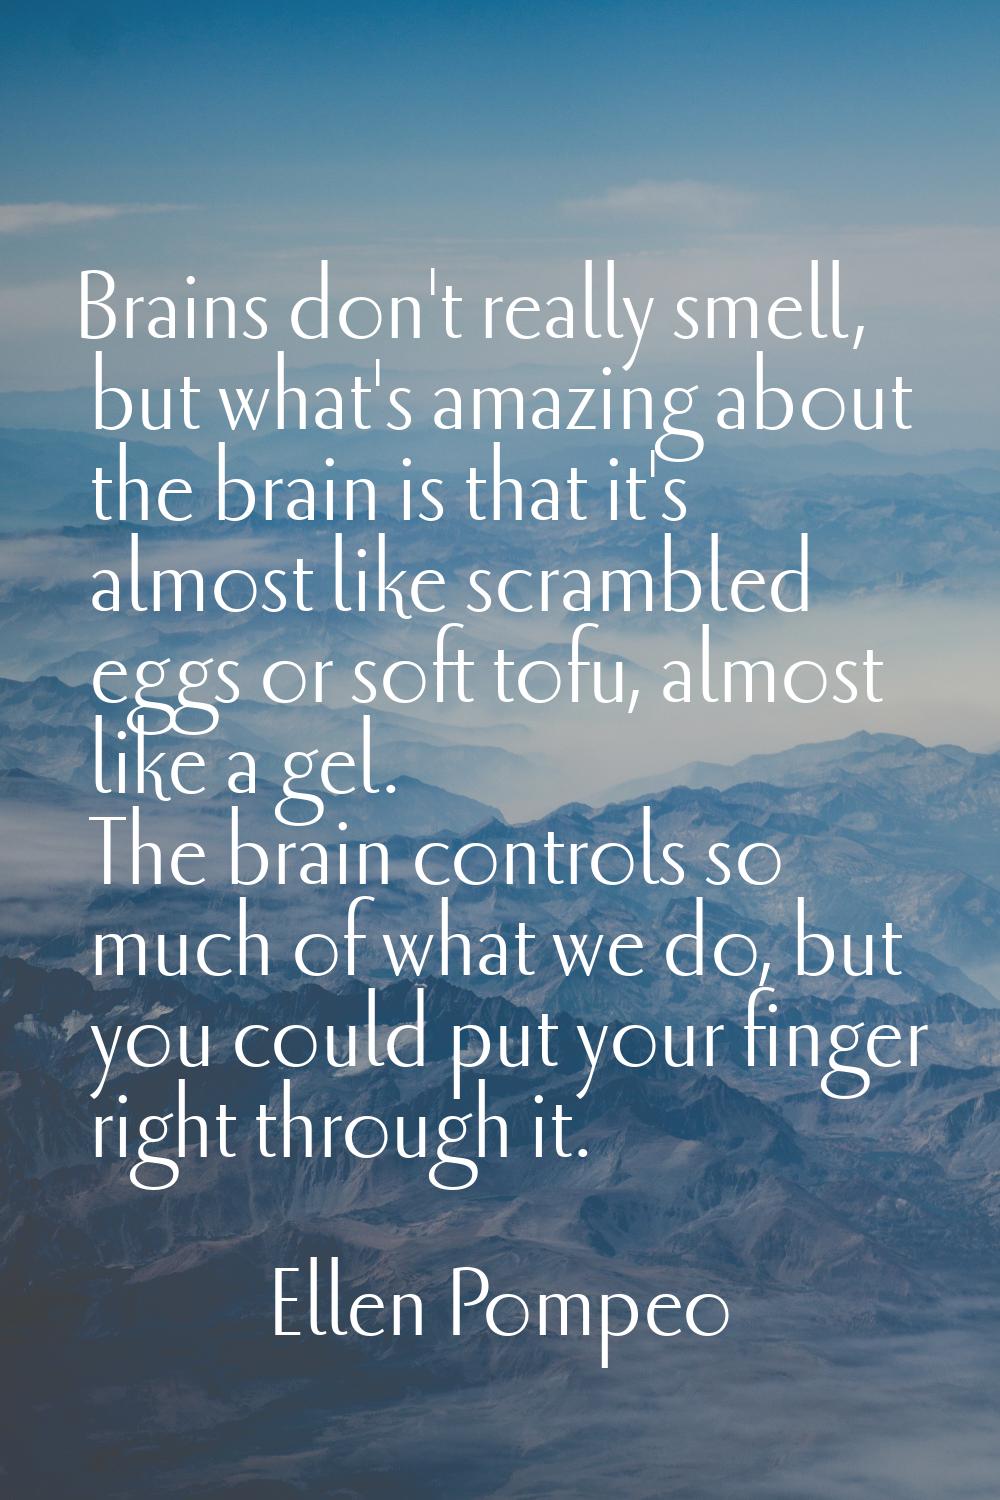 Brains don't really smell, but what's amazing about the brain is that it's almost like scrambled eg